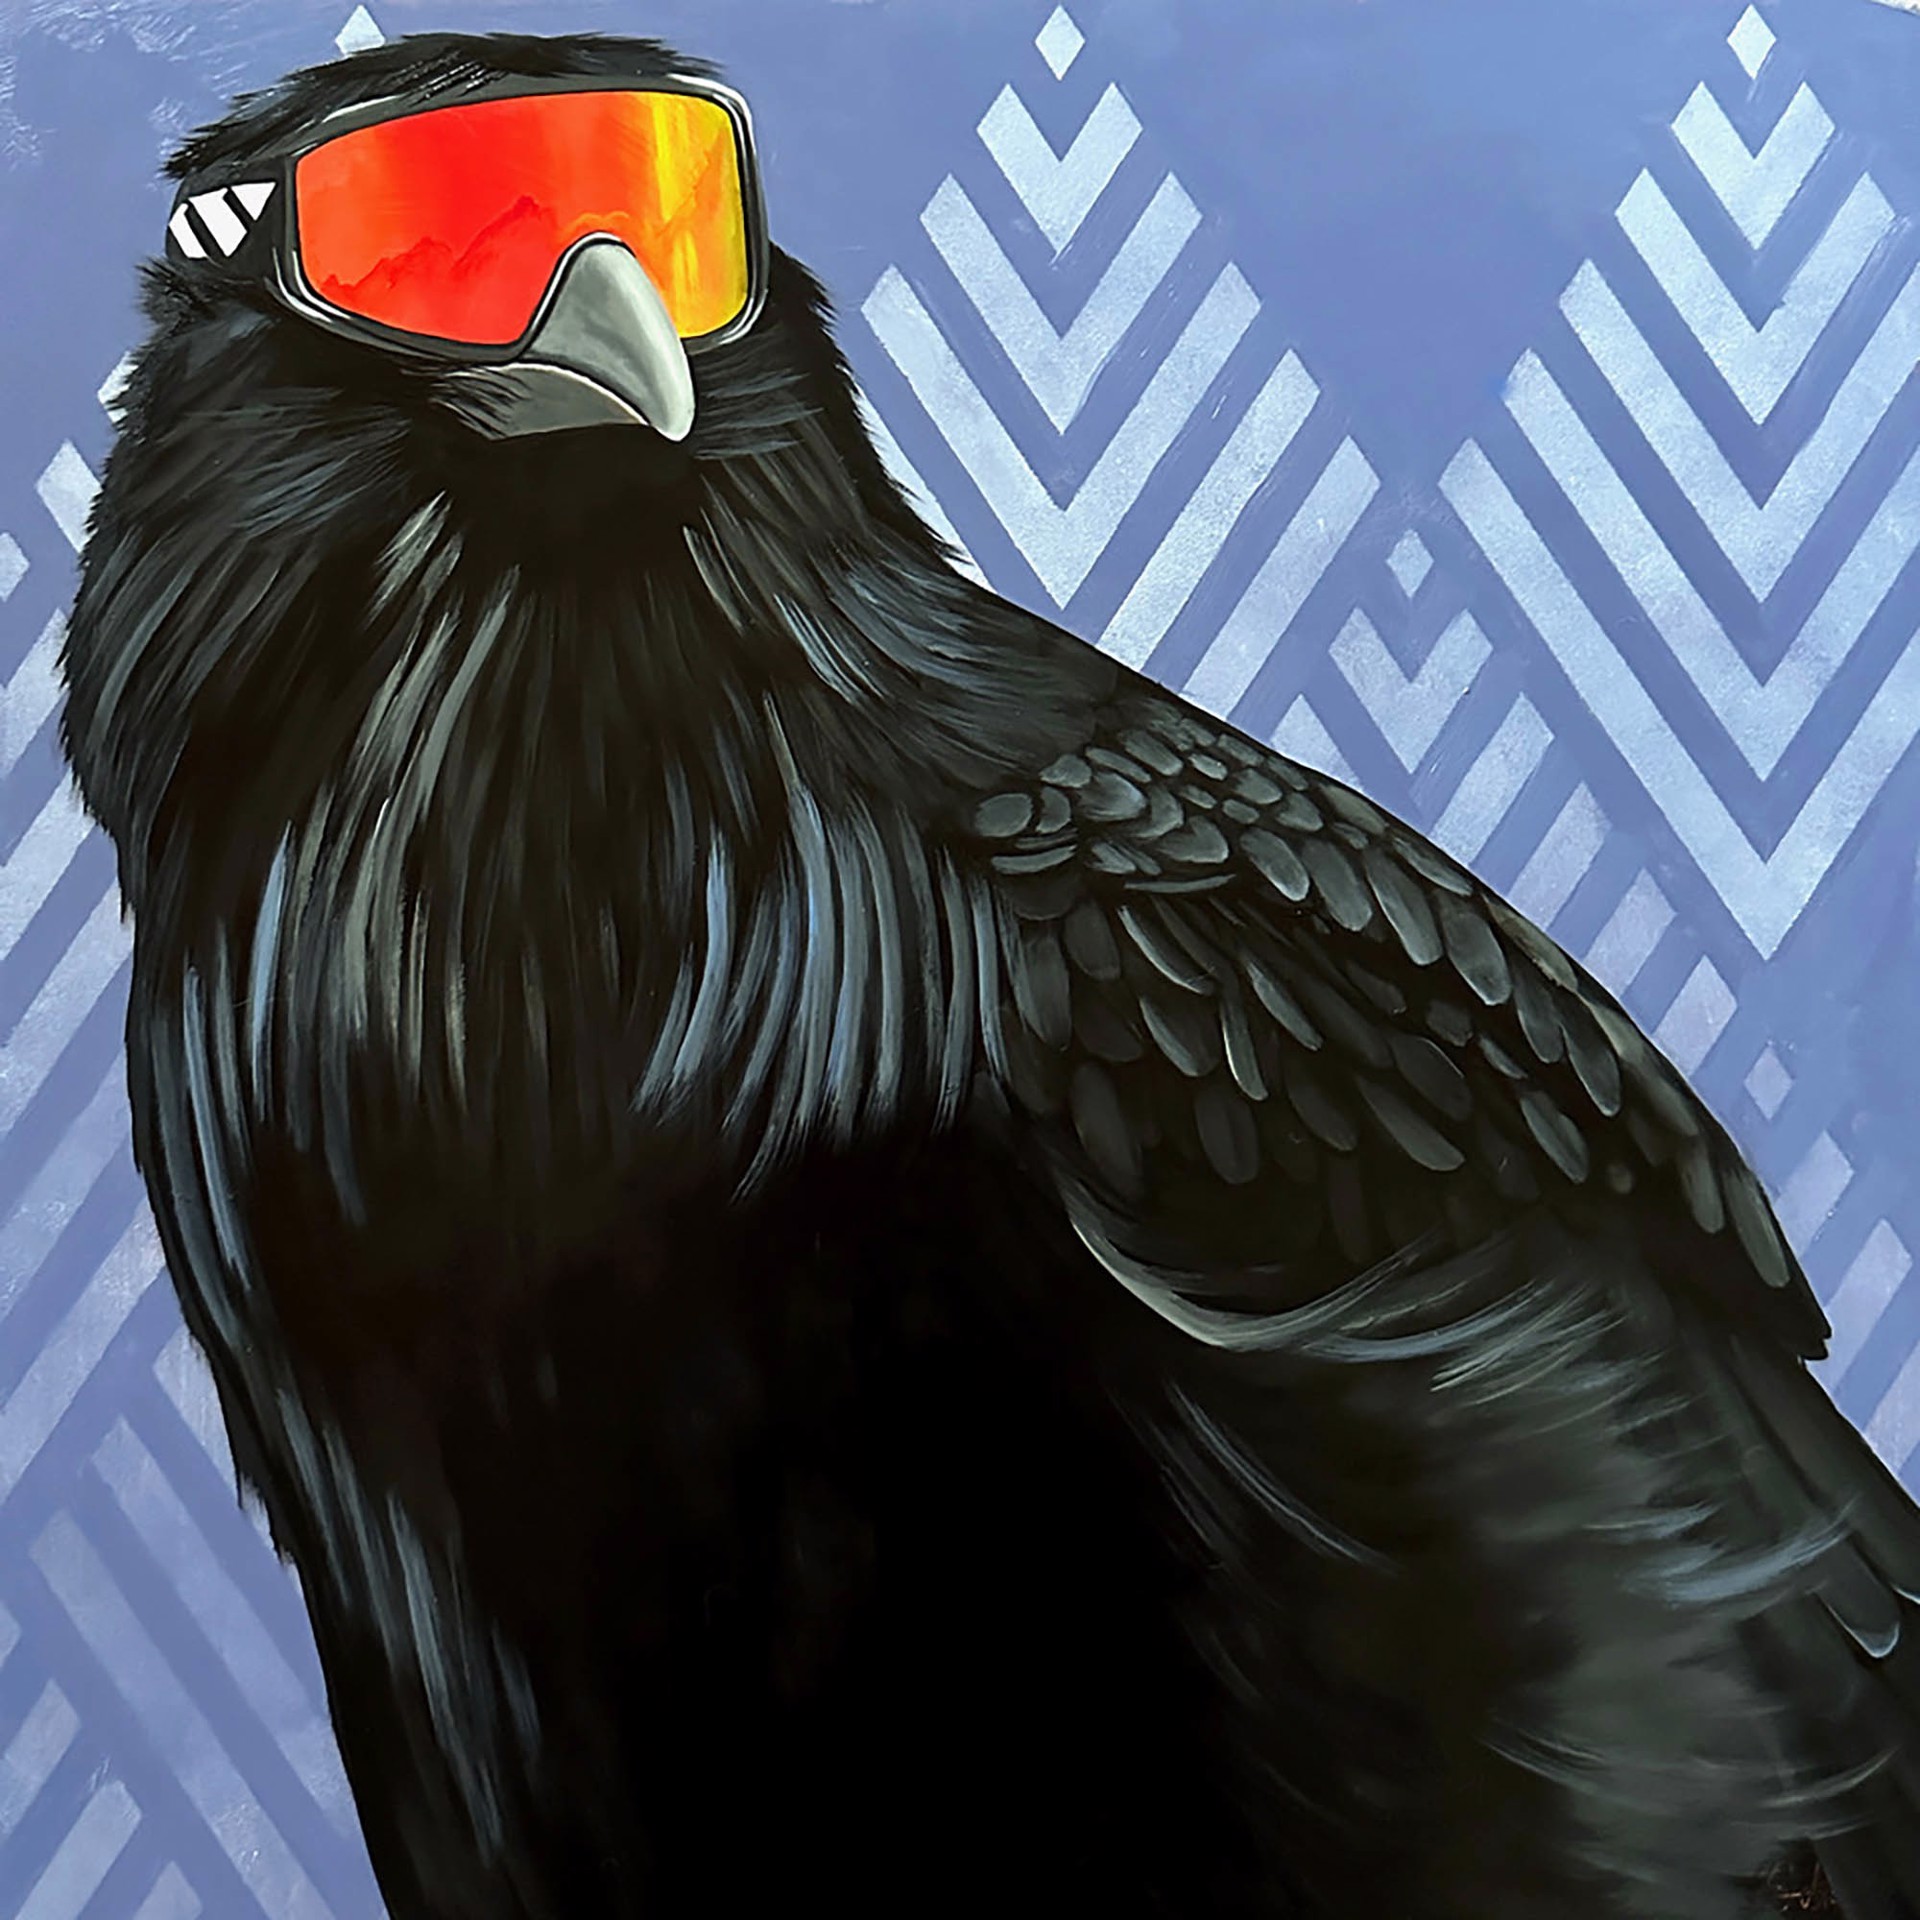 Original Painting by Christy Stallop Featuring a Raven Wearing Goggles on a Blue Background with the Grand Tetons